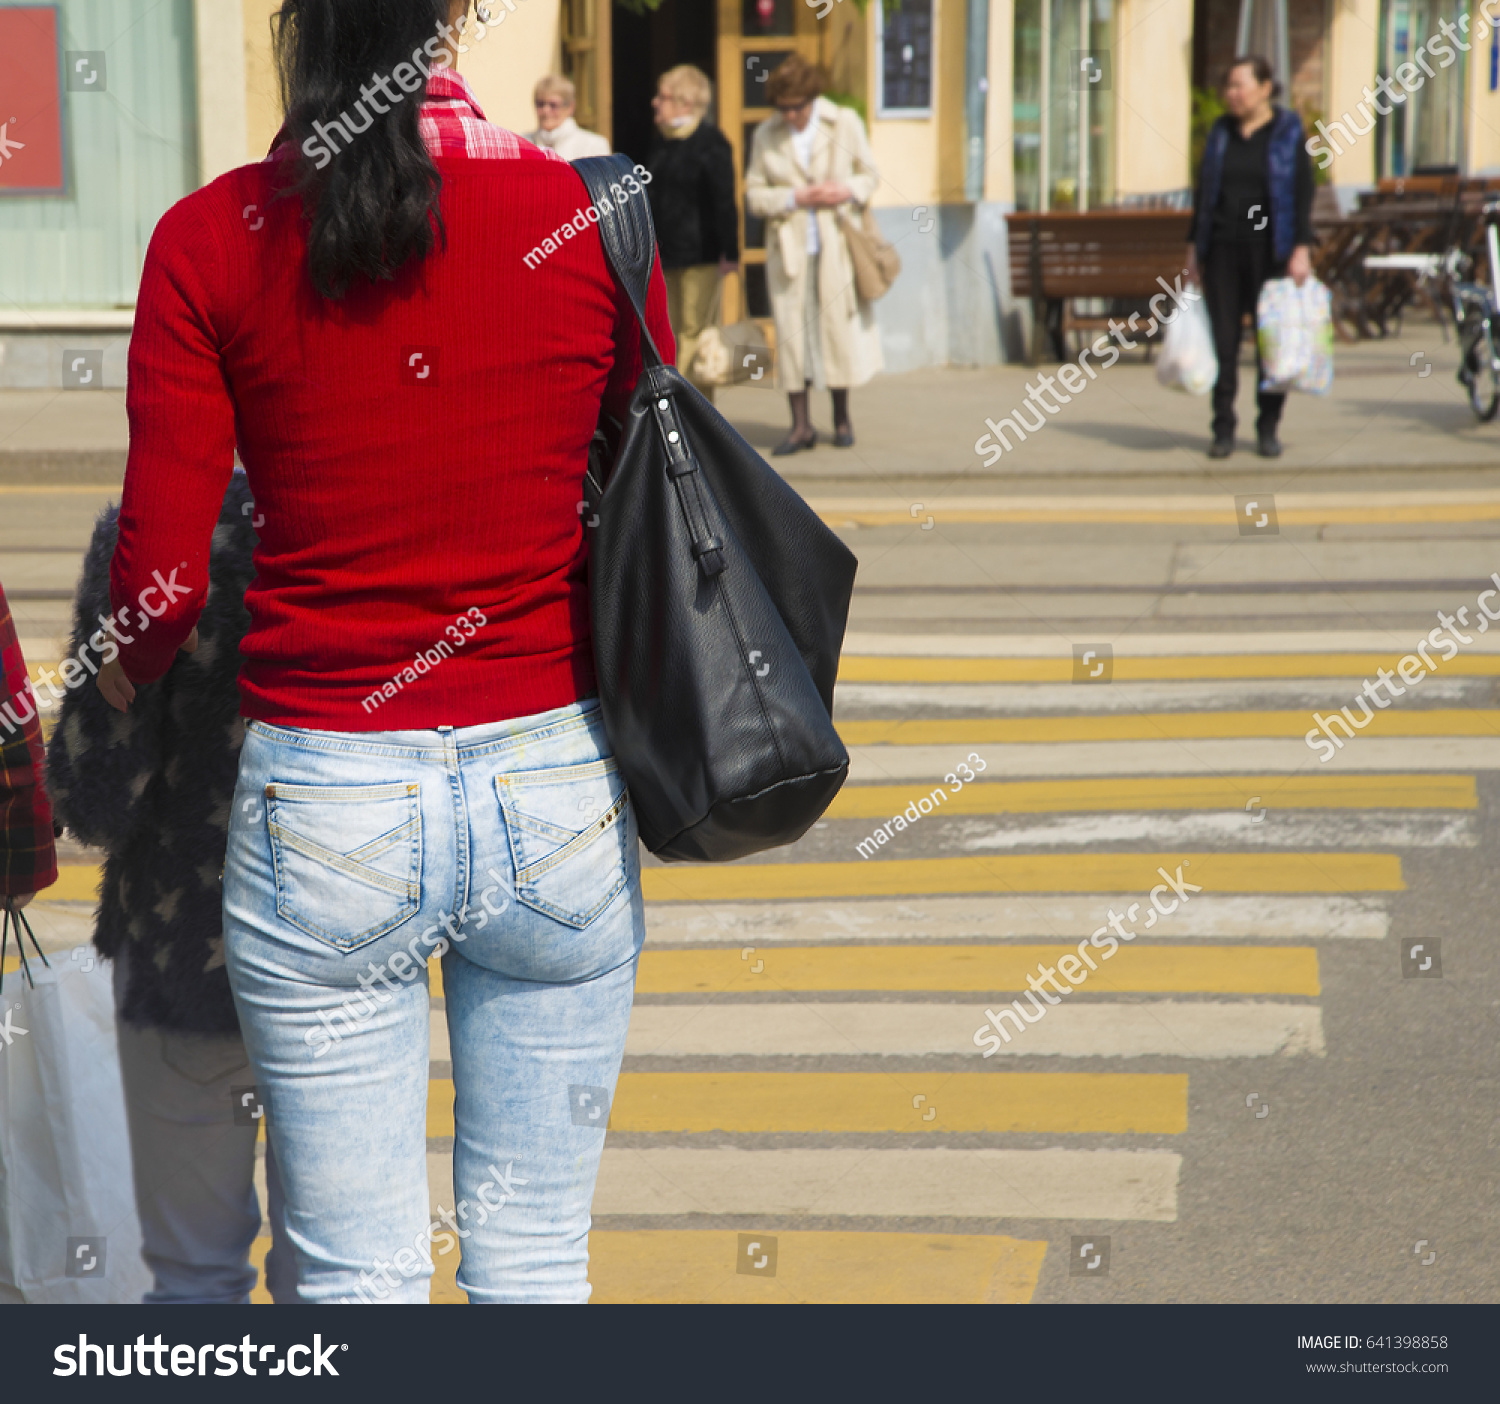 Great ass walking the streets